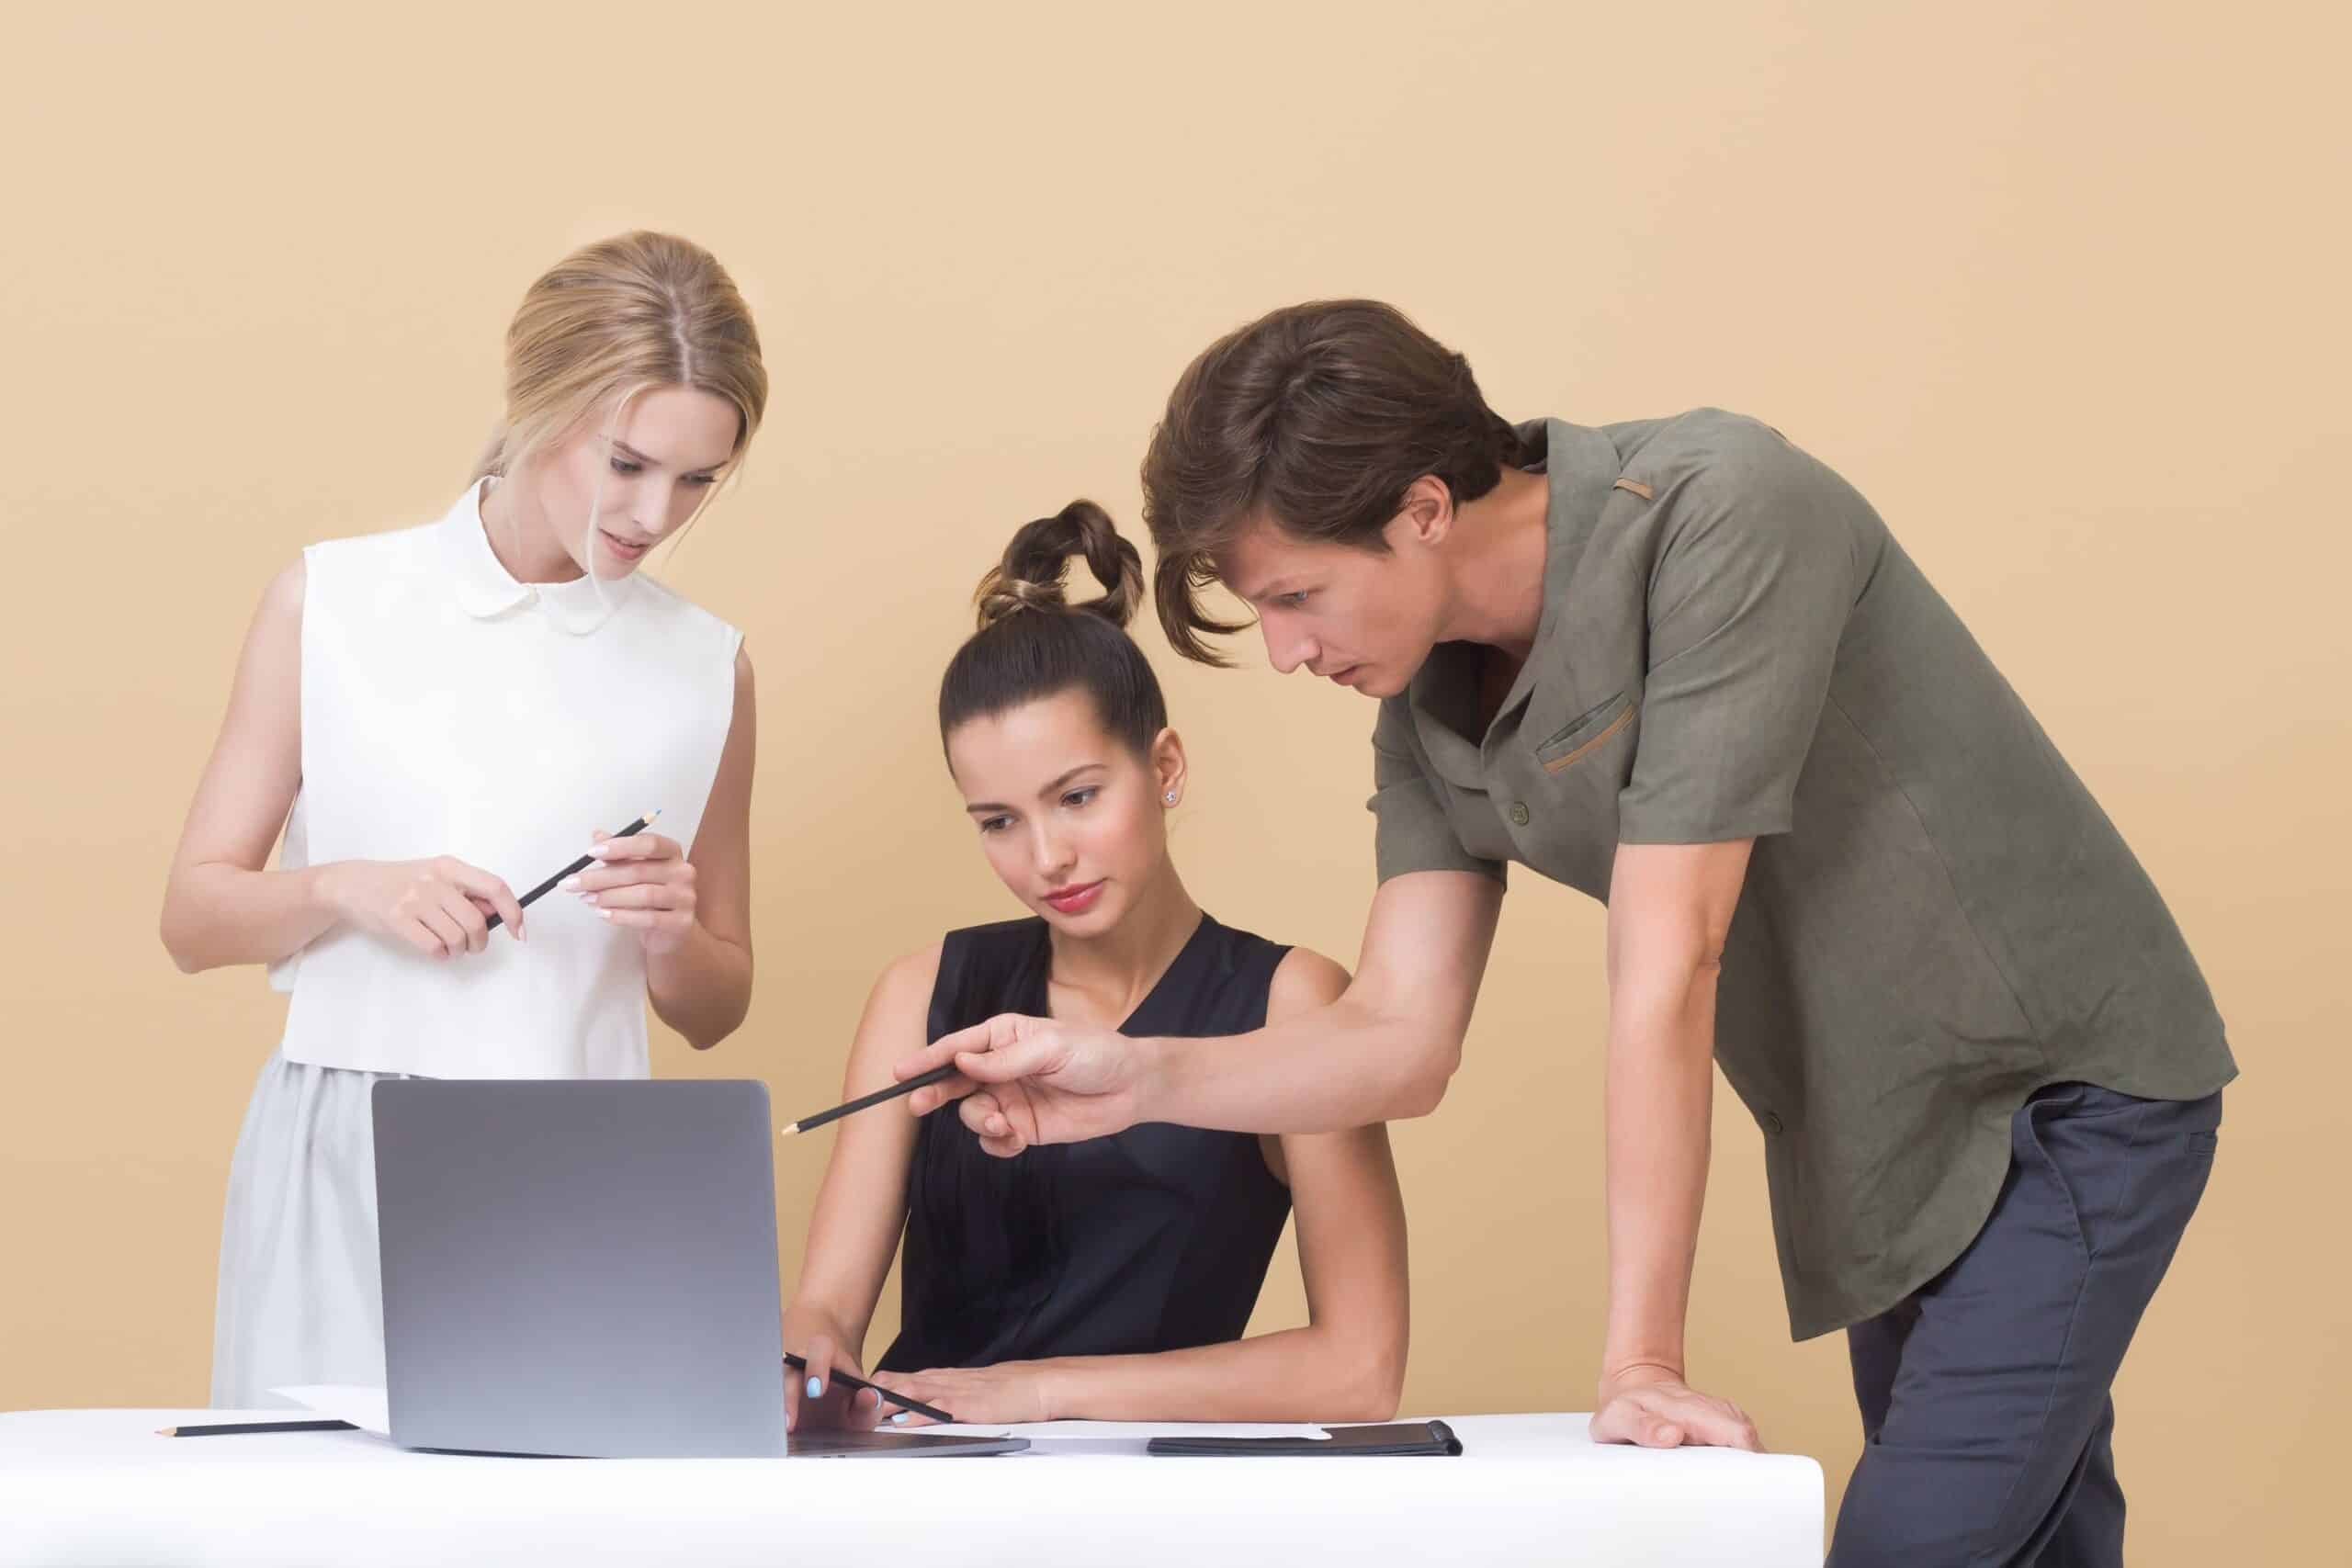 Two woman and one man looking at the laptop